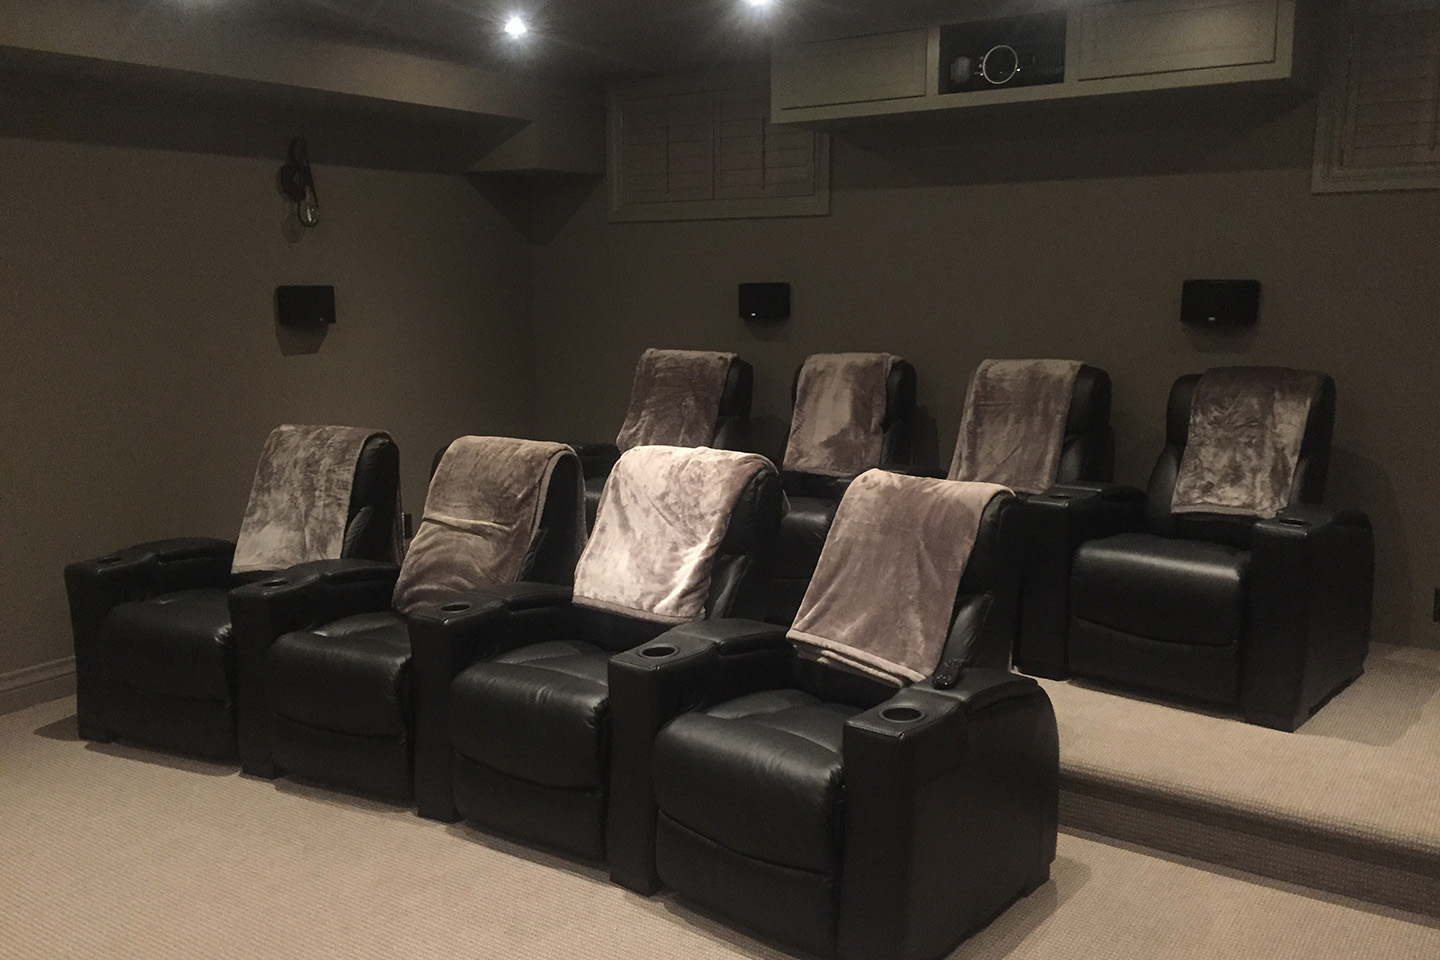 Seat Home Theater with Riser and Custom Projector Casing